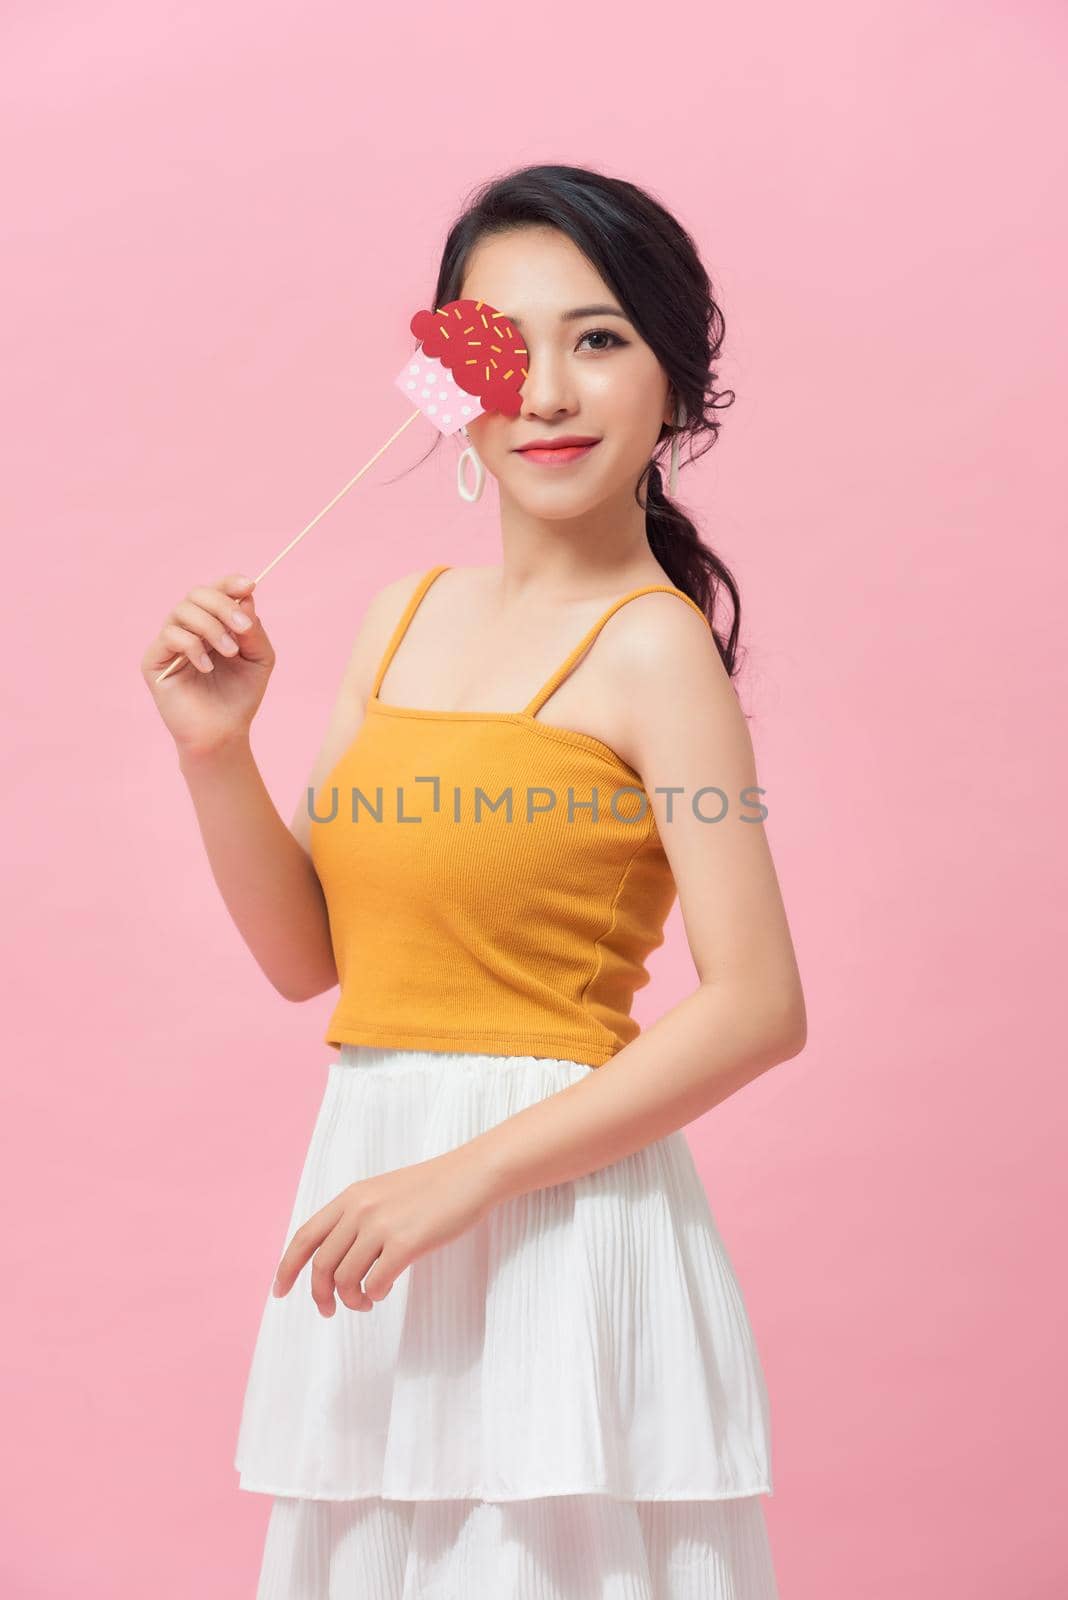 Happy young woman holding paper cupcake on stick over pink background by makidotvn